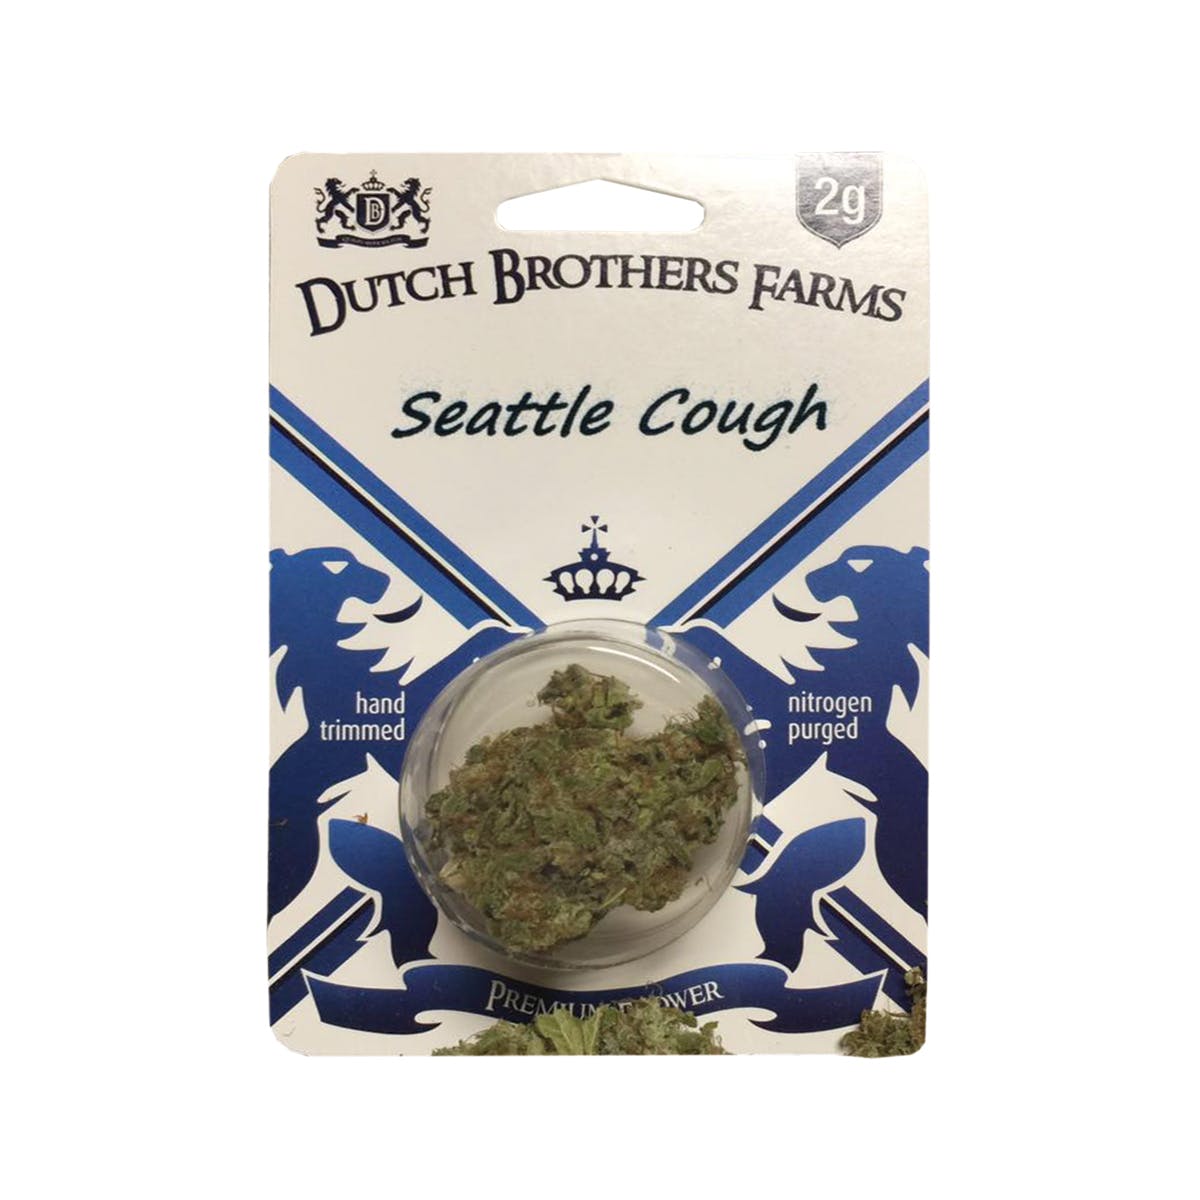 marijuana-dispensaries-a-bud-and-leaf-in-olympia-seattle-cough